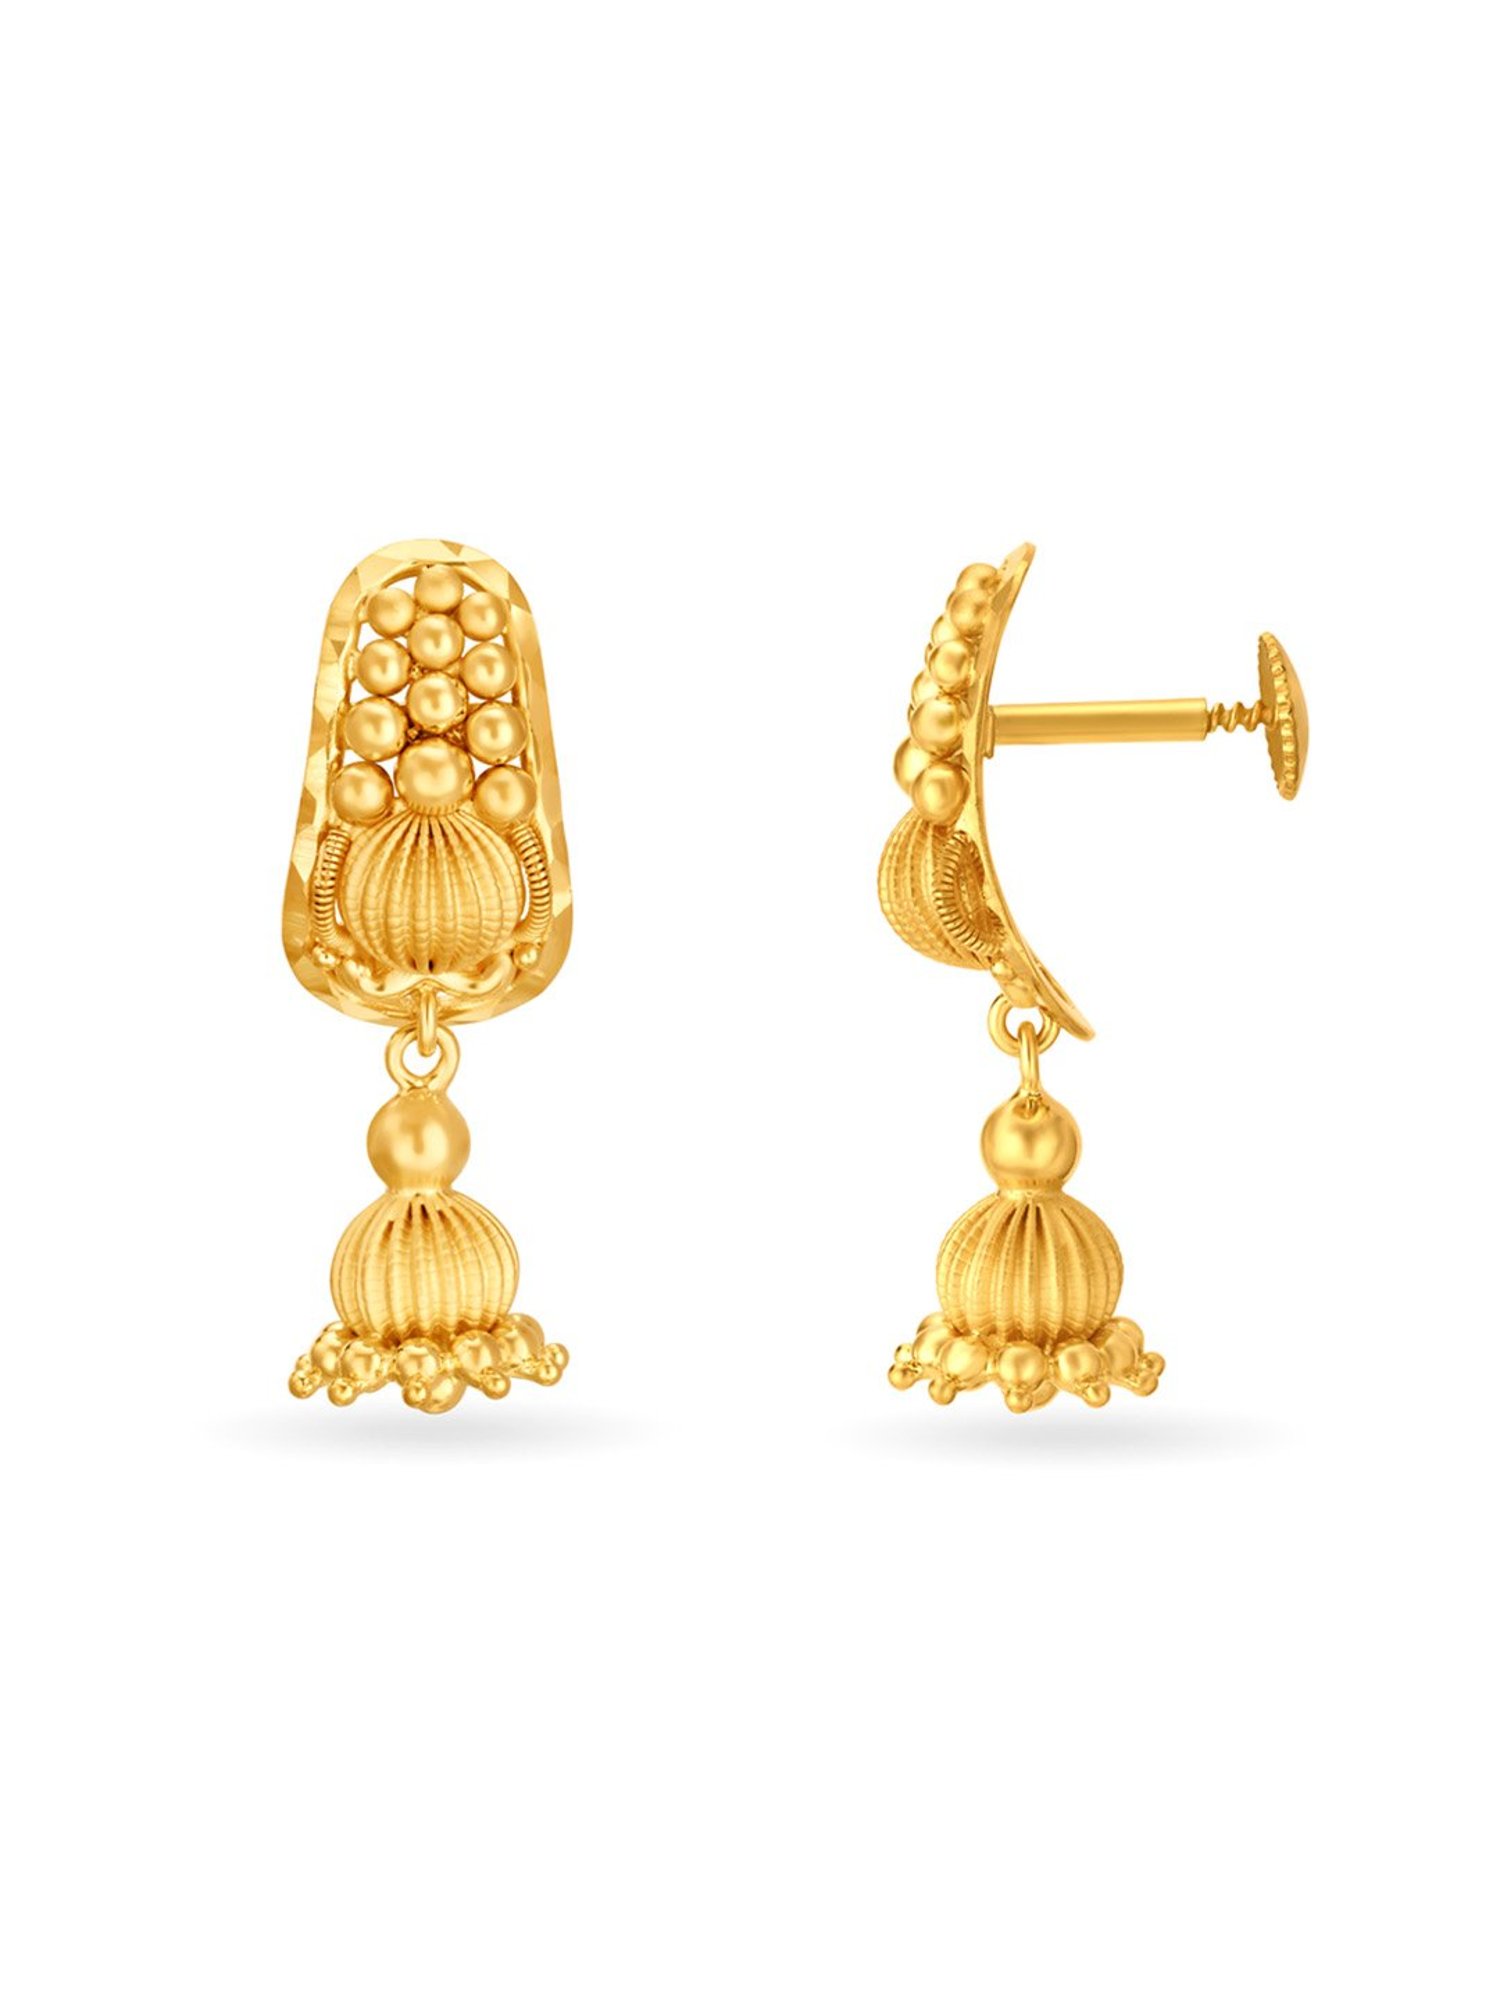 Tanishq's Earrings Are an Ode to Your Stylish Individuality | Femina.in